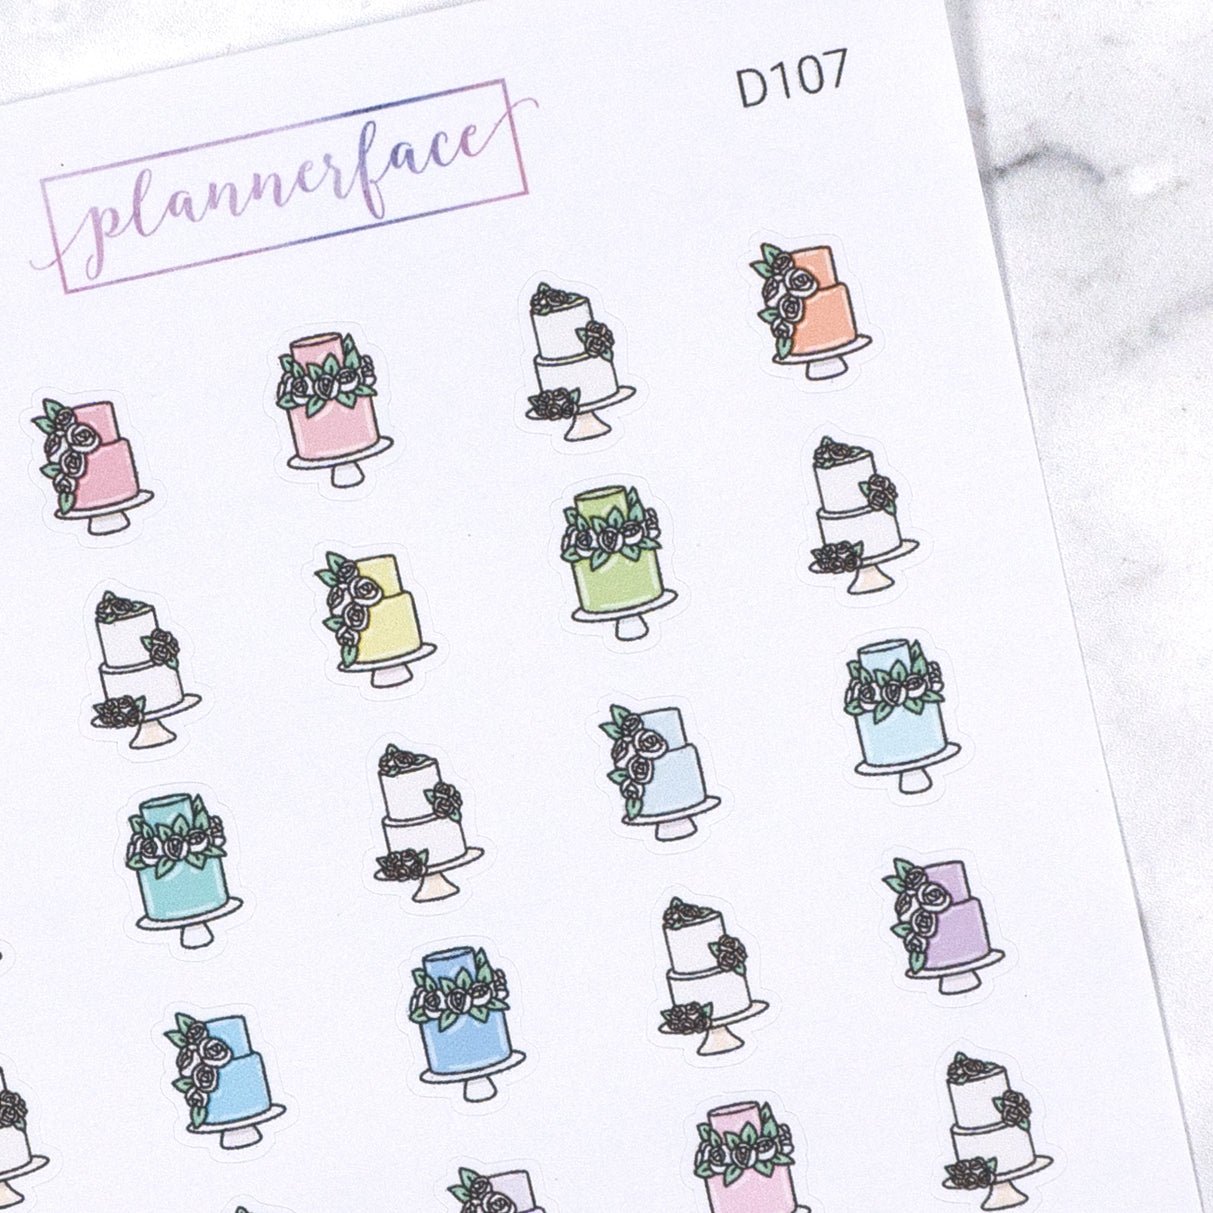 Wedding Tiered Cakes Multicolour Doodles by Plannerface